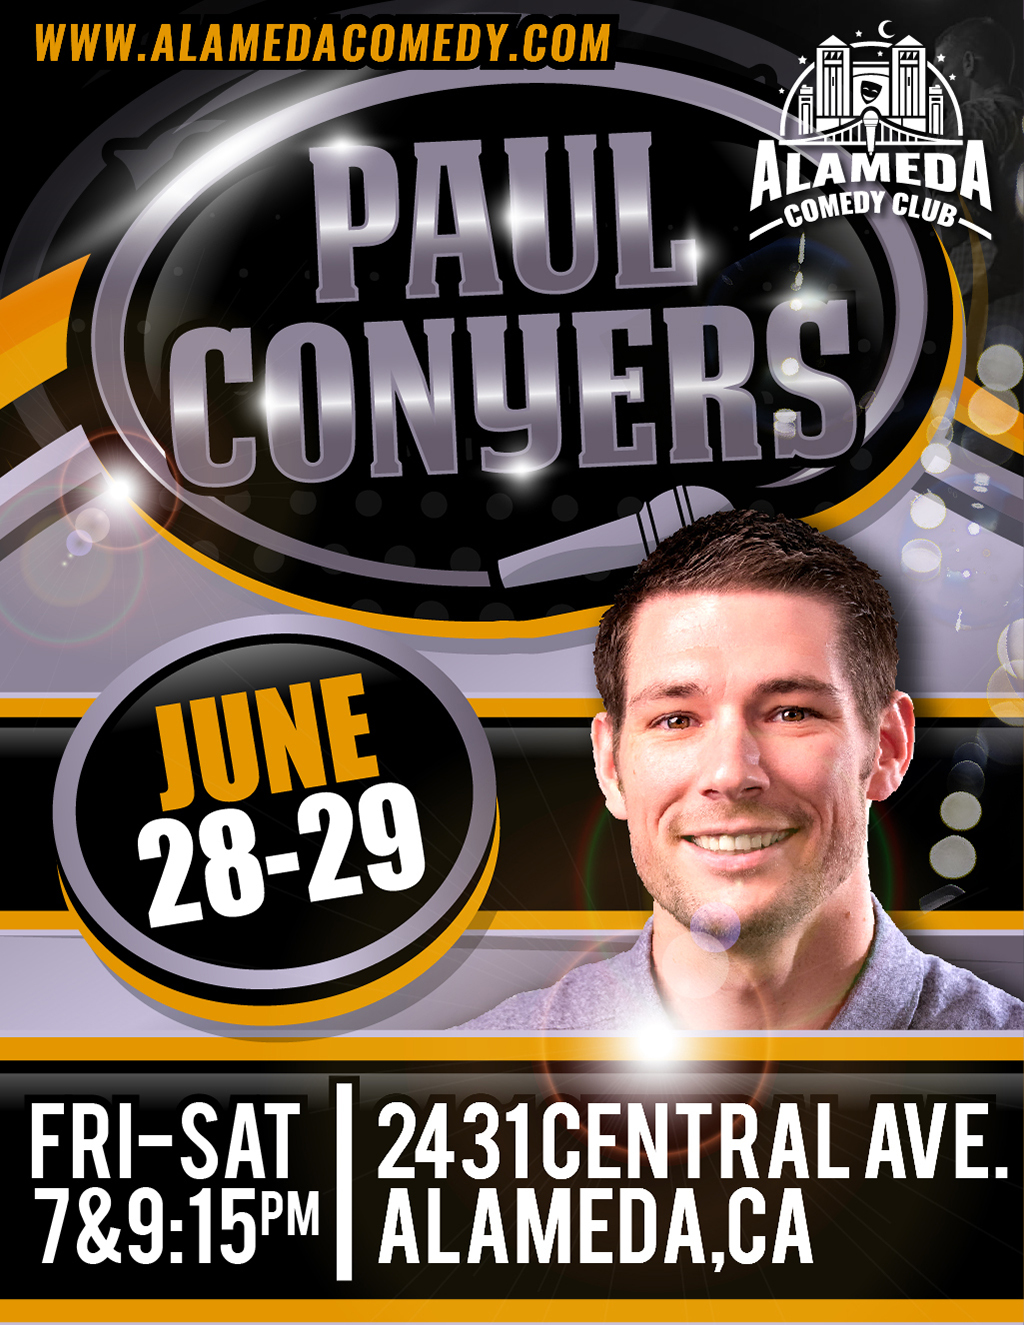 Alameda Comedy Club Get Ready to Laugh with Paul Conyers at Alameda Comedy Club  promotion flier on Digifli com